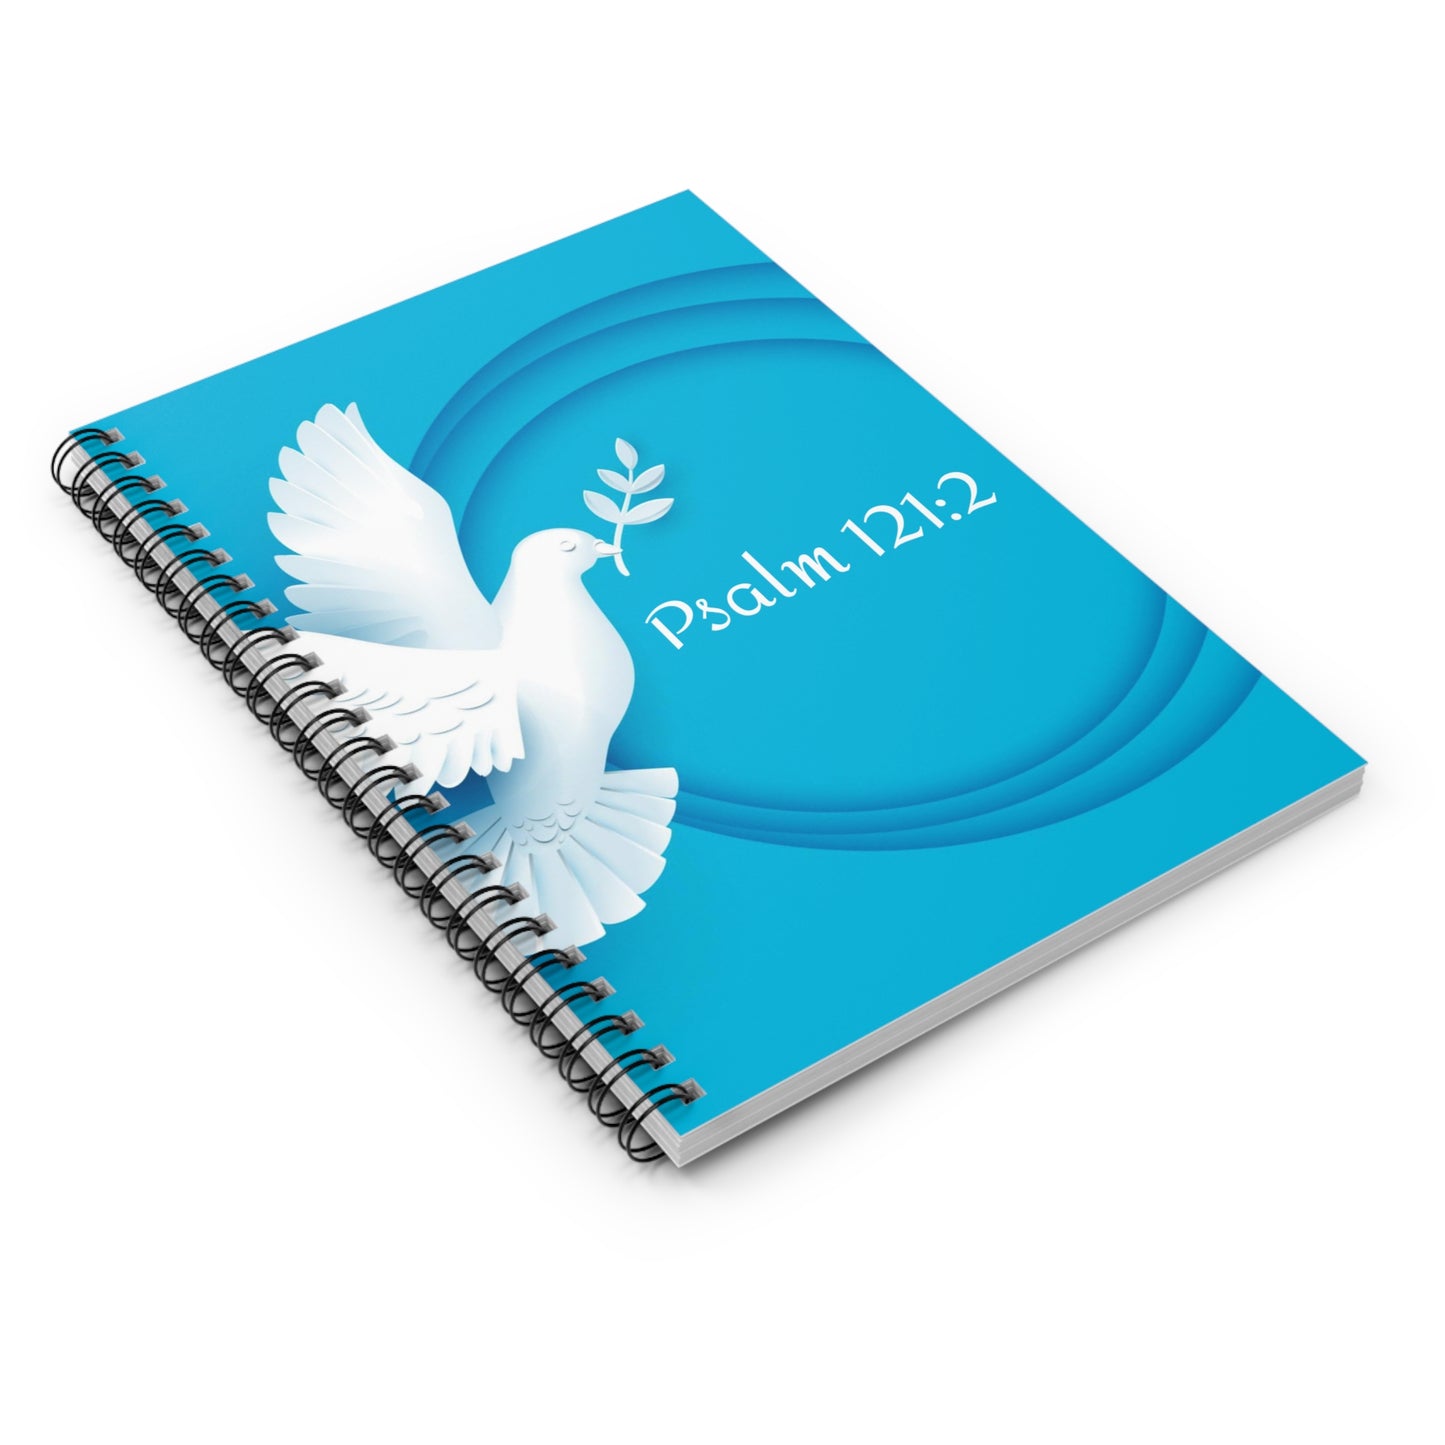 "Psalm 121:2" Spiral Notebook - Ruled Line